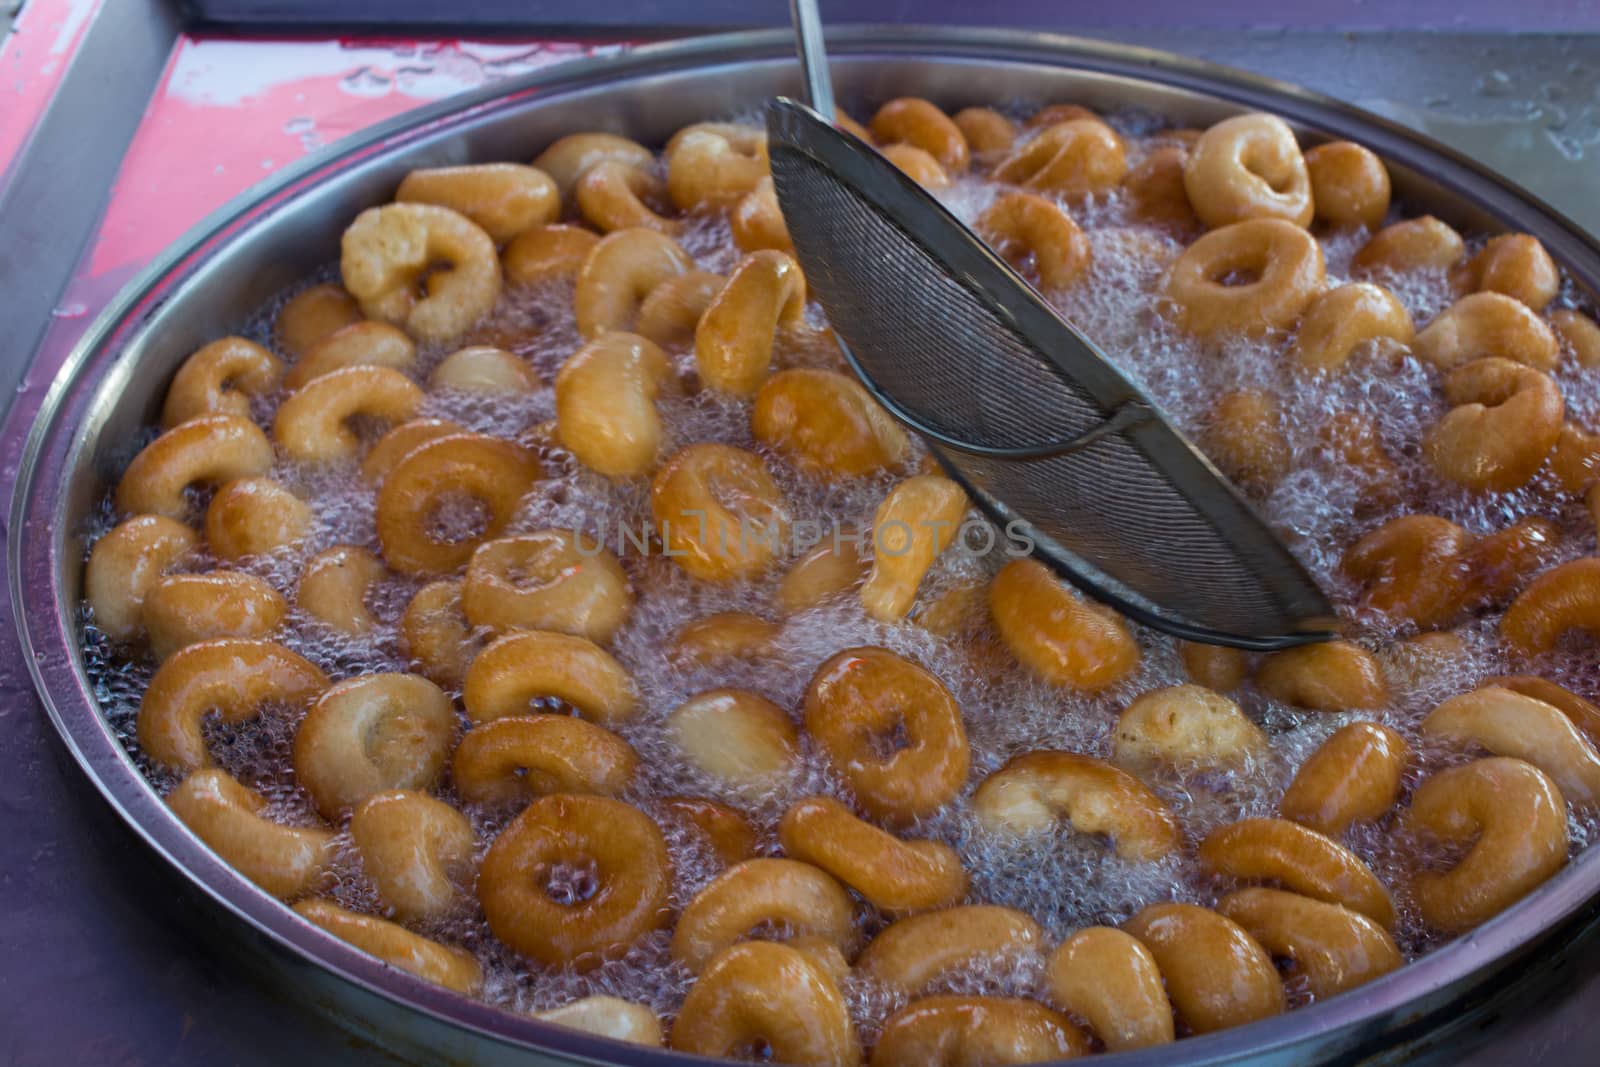 "Lokma" dessert; Prepared with flour, yeast, salt and sugar, prepared by frying in oil and sweetened with dark-colored syrup.